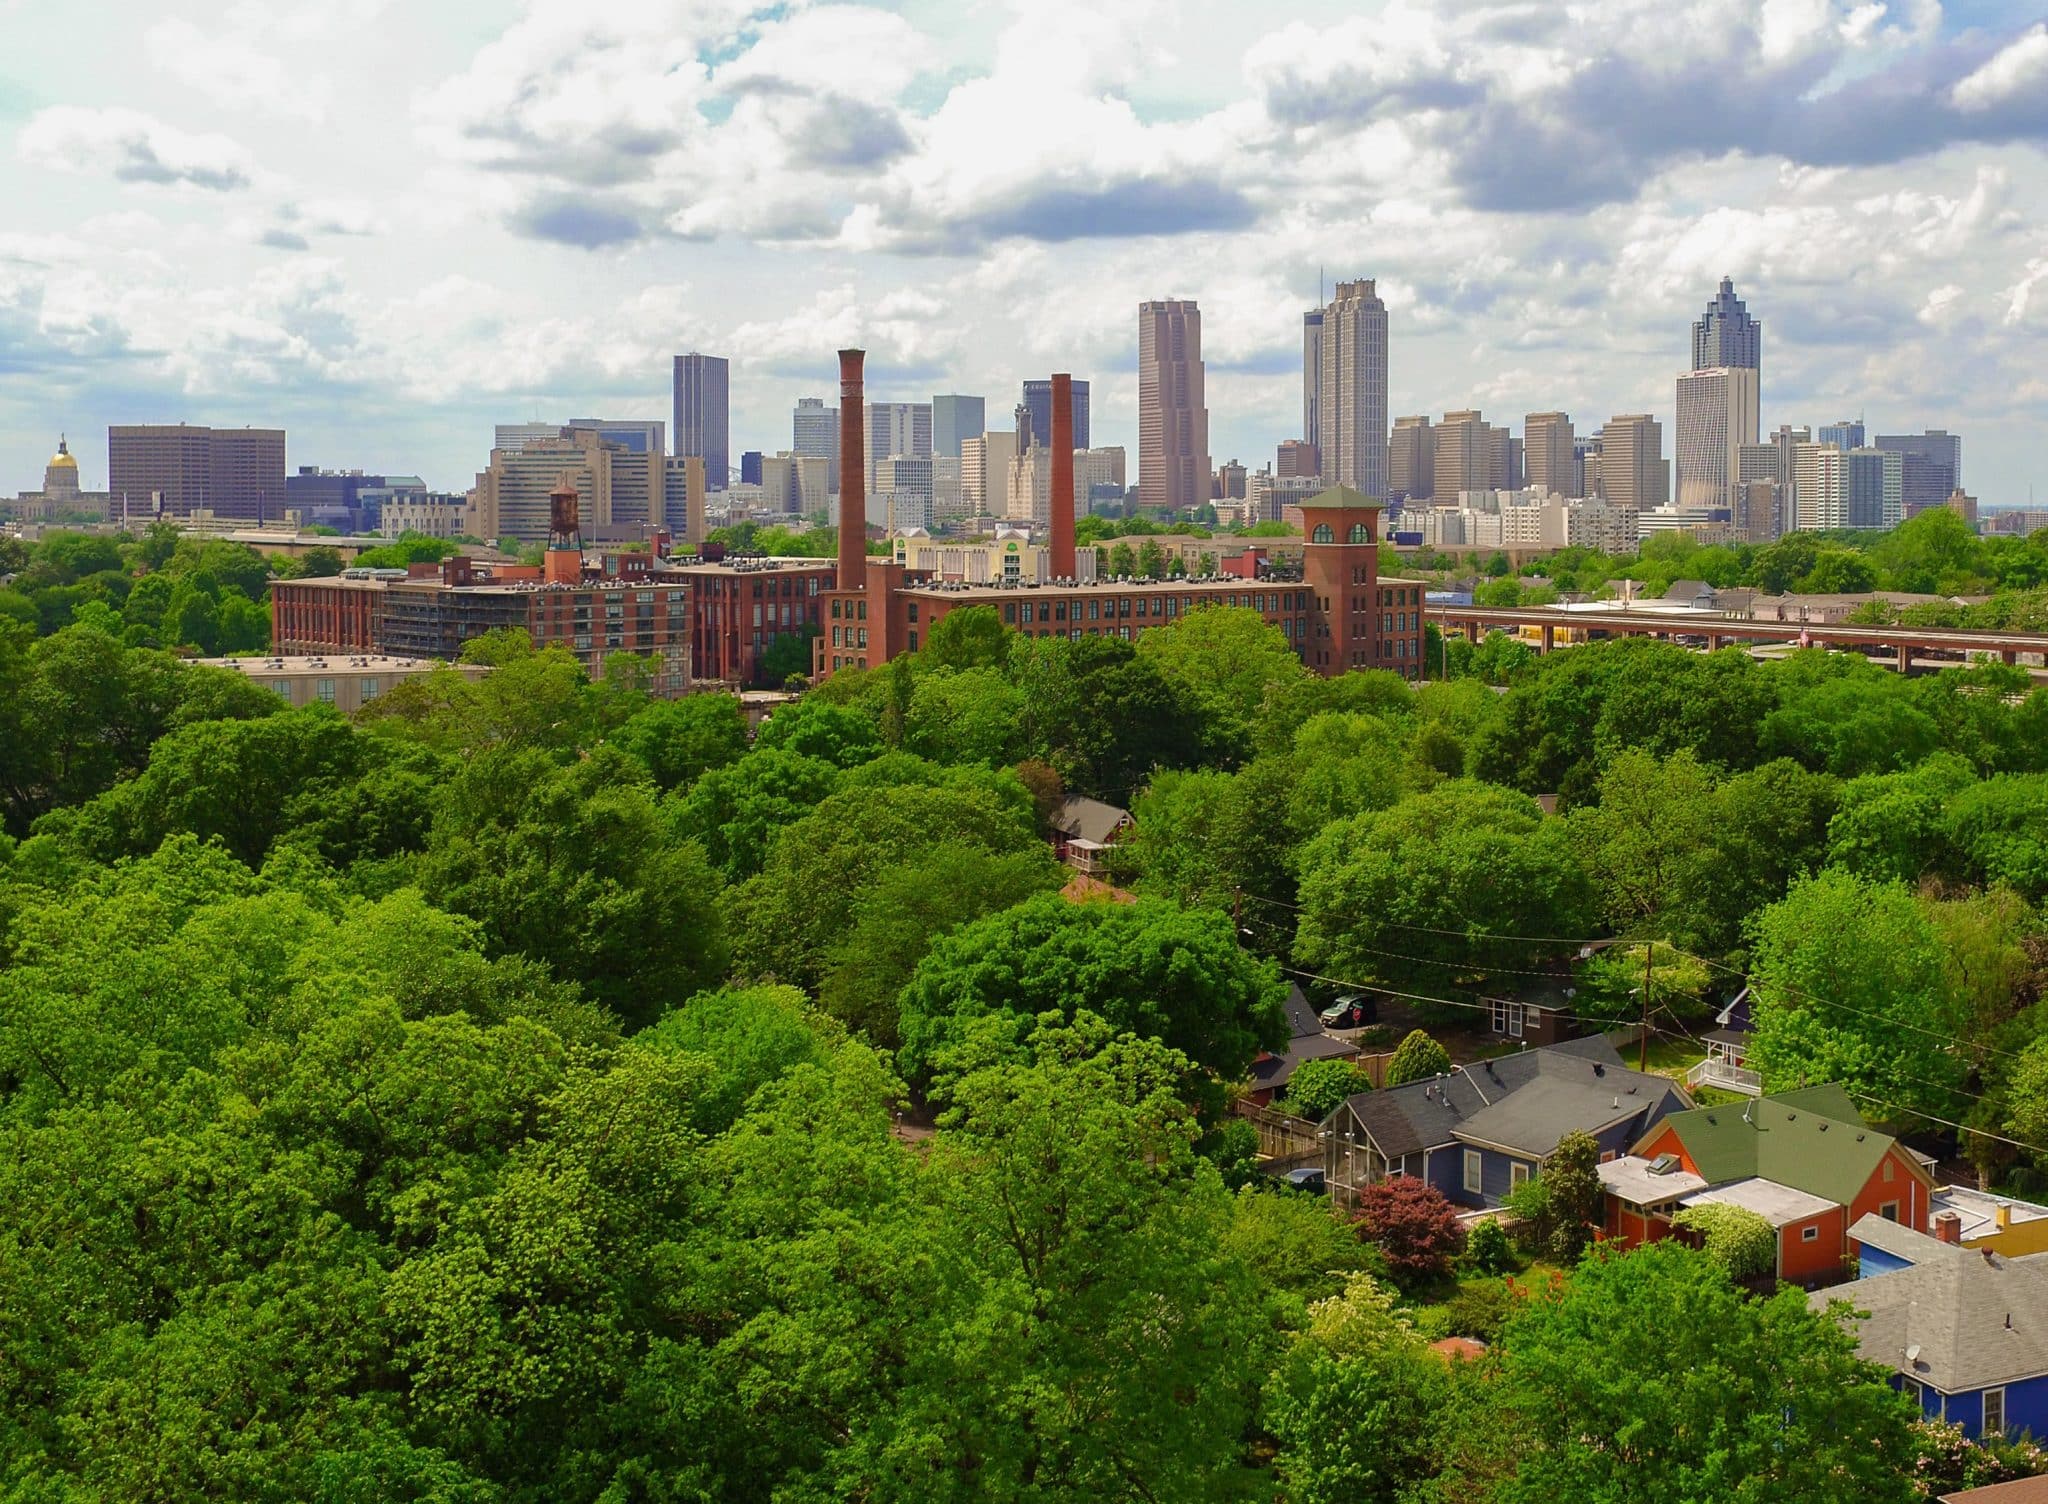 Atlanta has big changes in store when it comes to trees